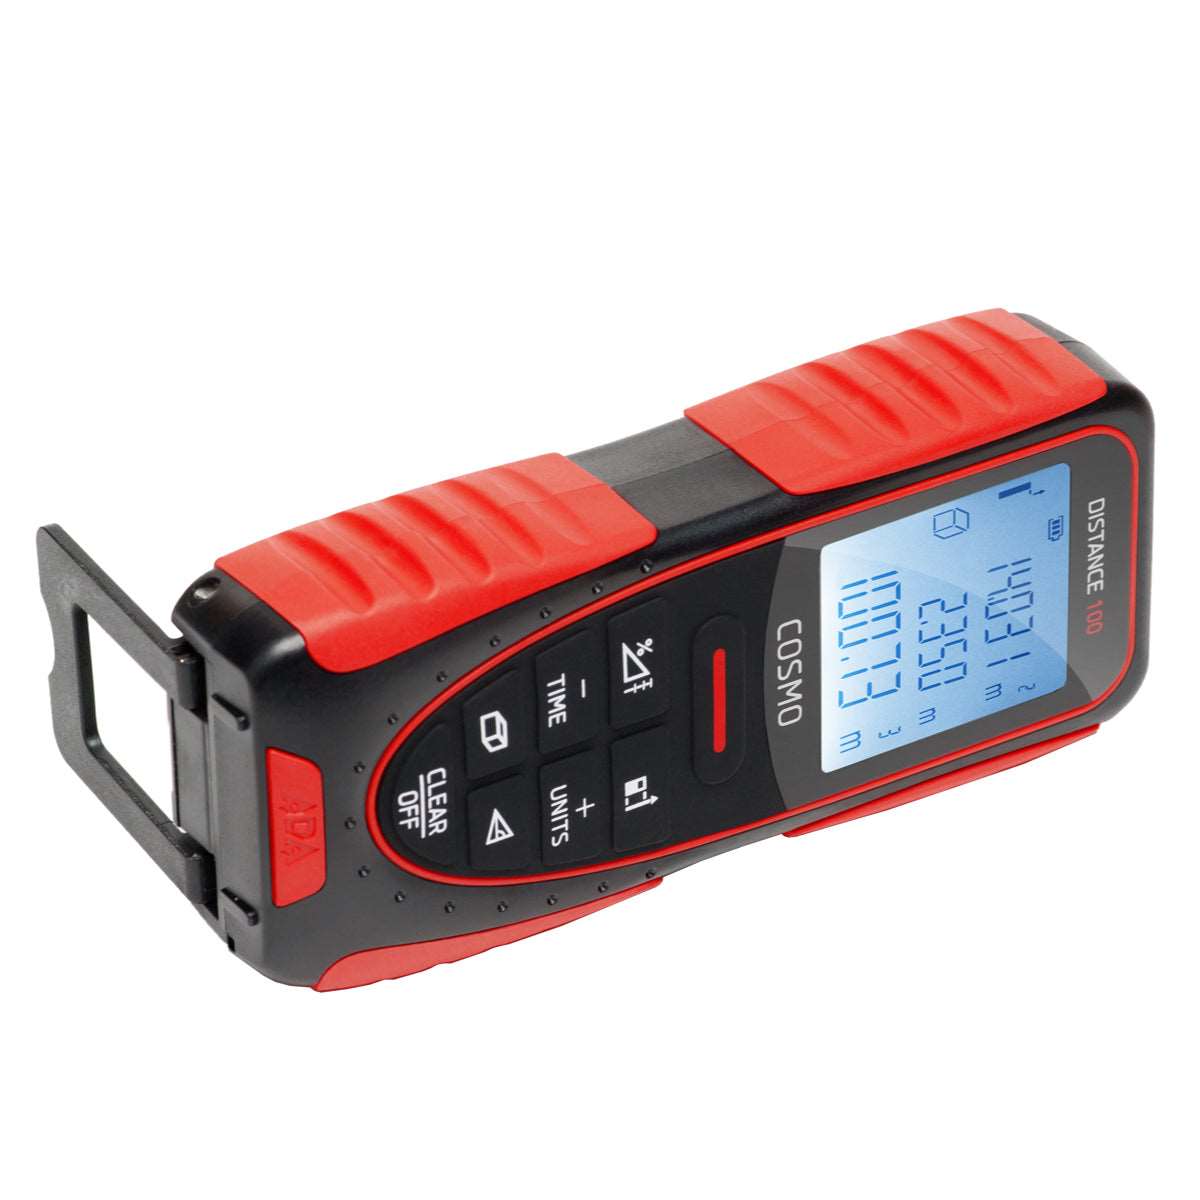 ADA Laser Distance and Angle Measurer 100m A00412 Power Tool Services